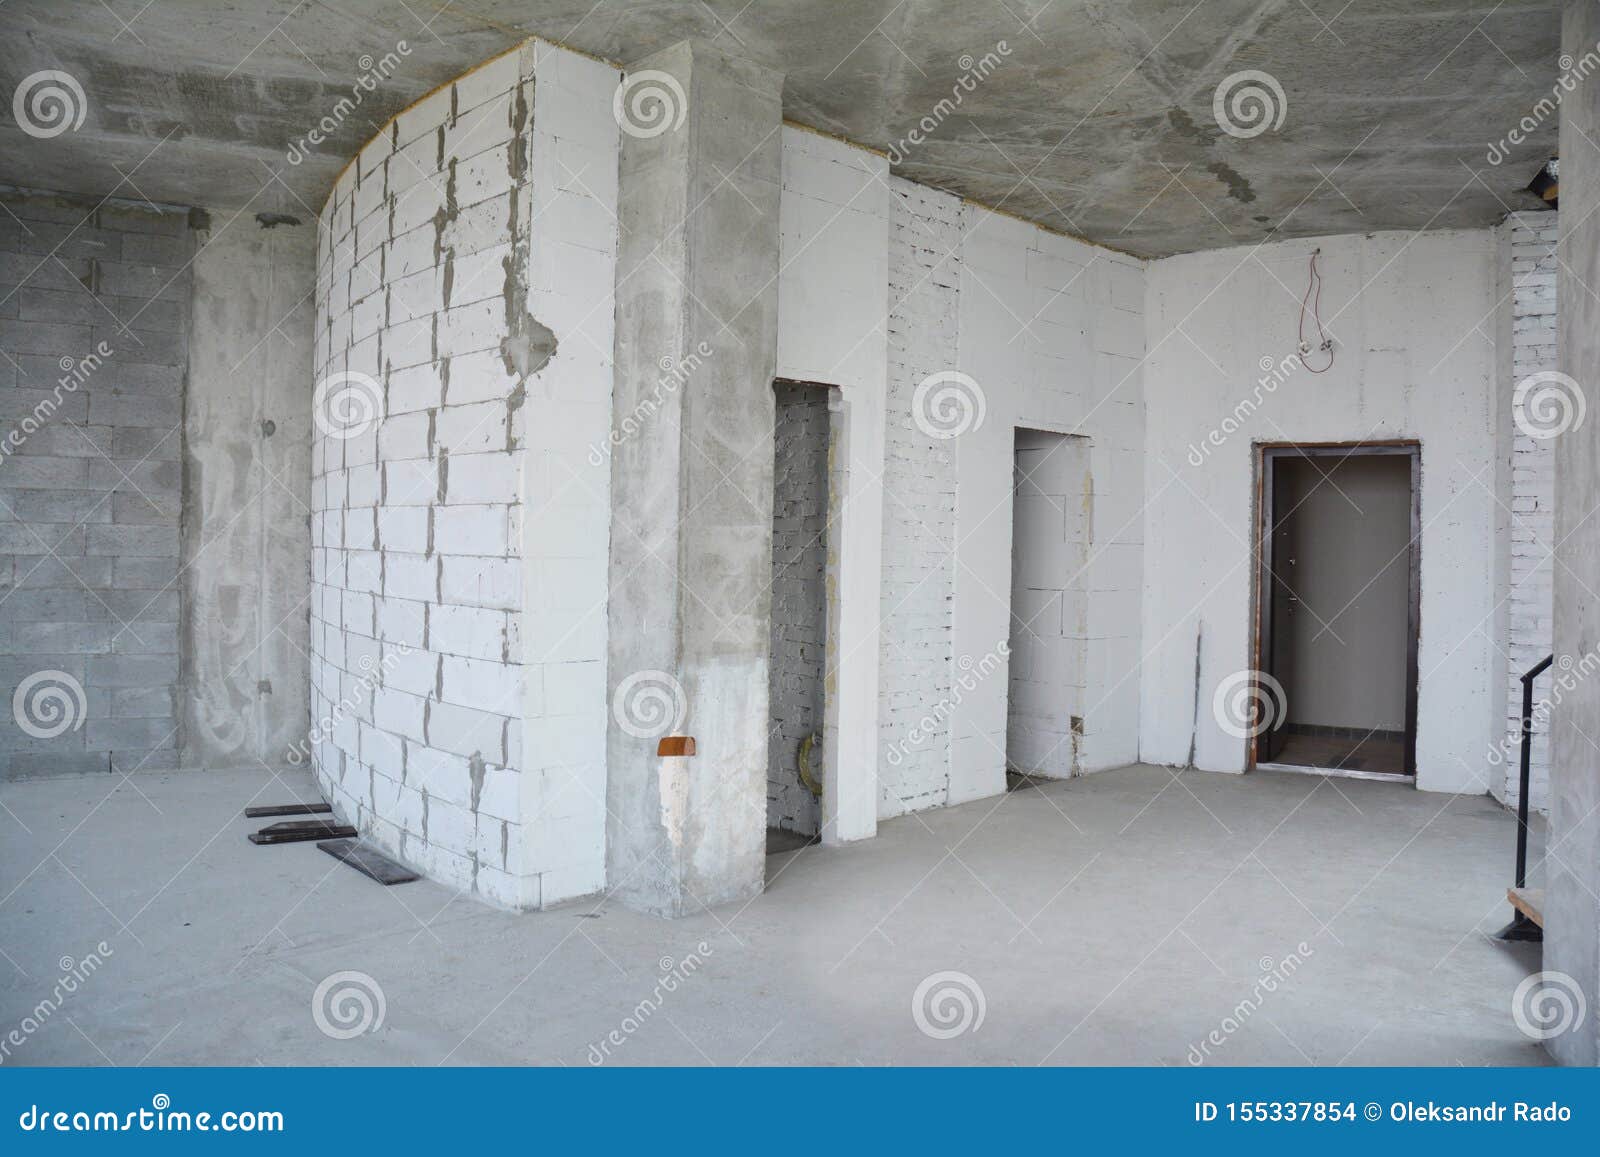 interior hall room under construction, metal door lintels. wall without plasterwork and ready to remodel